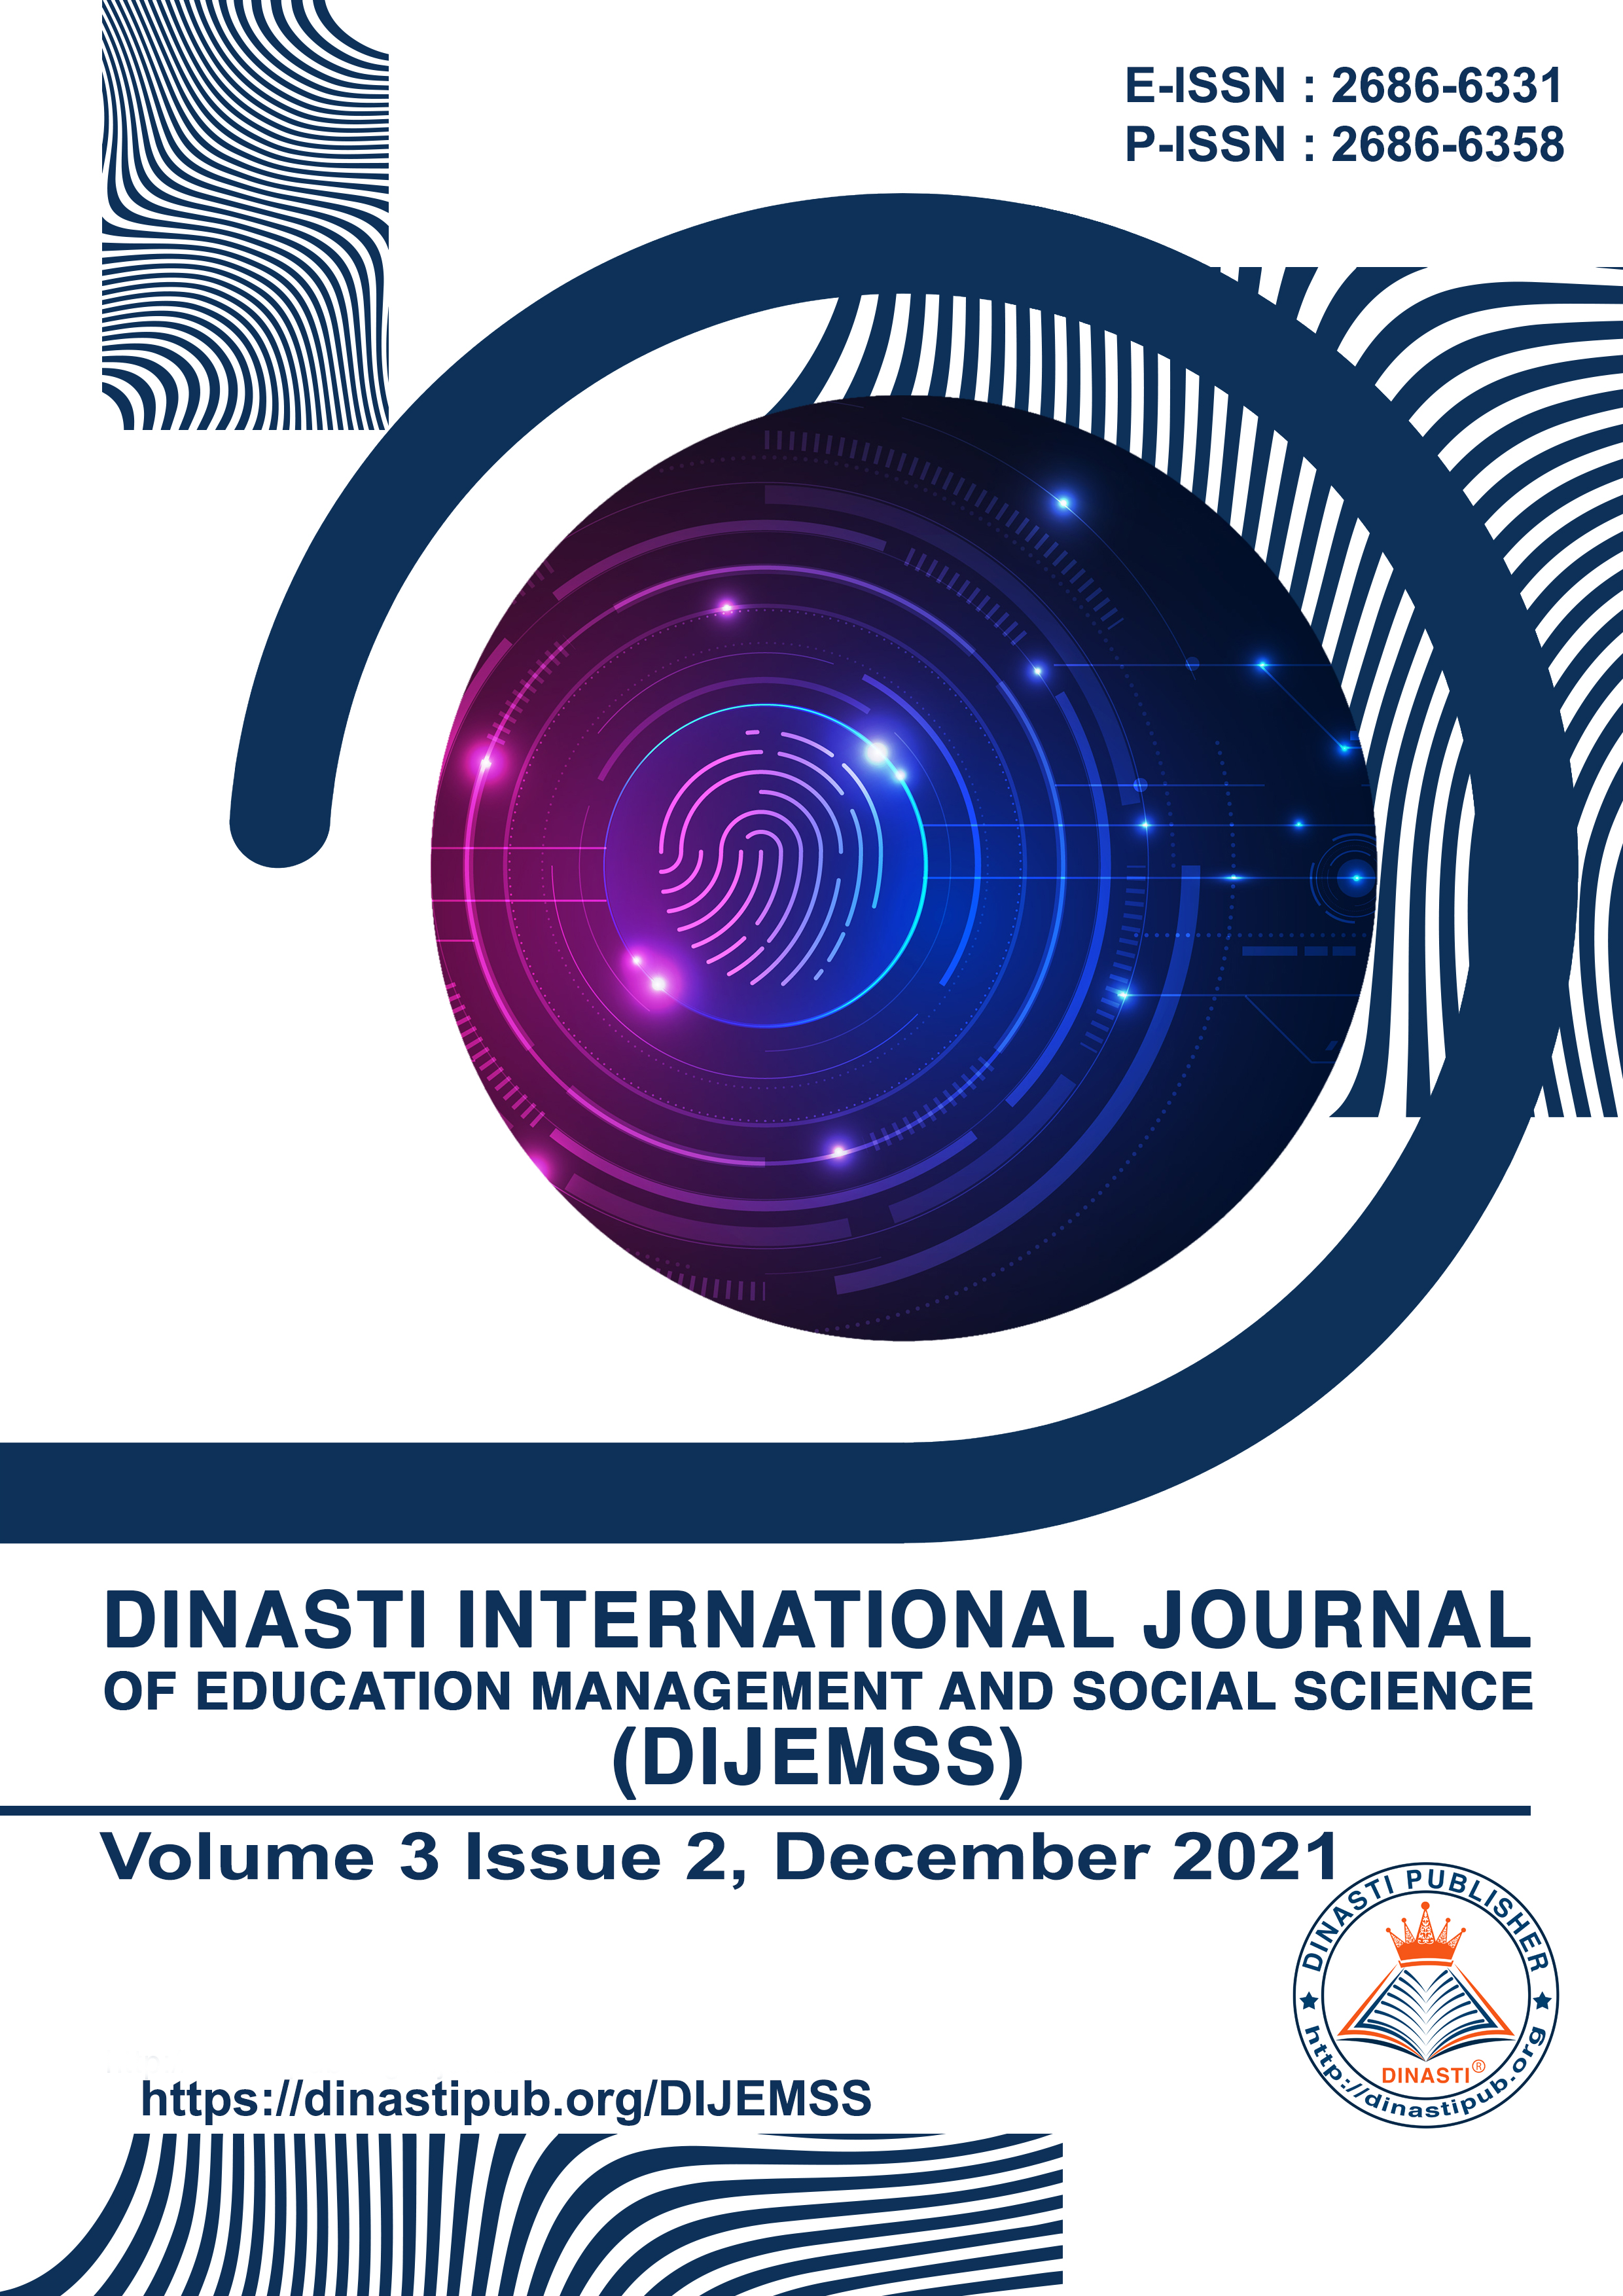 					View Vol. 3 No. 2 (2021): Dinasti International Journal of Education Management and Social Science (December 2021 - January 2022)
				